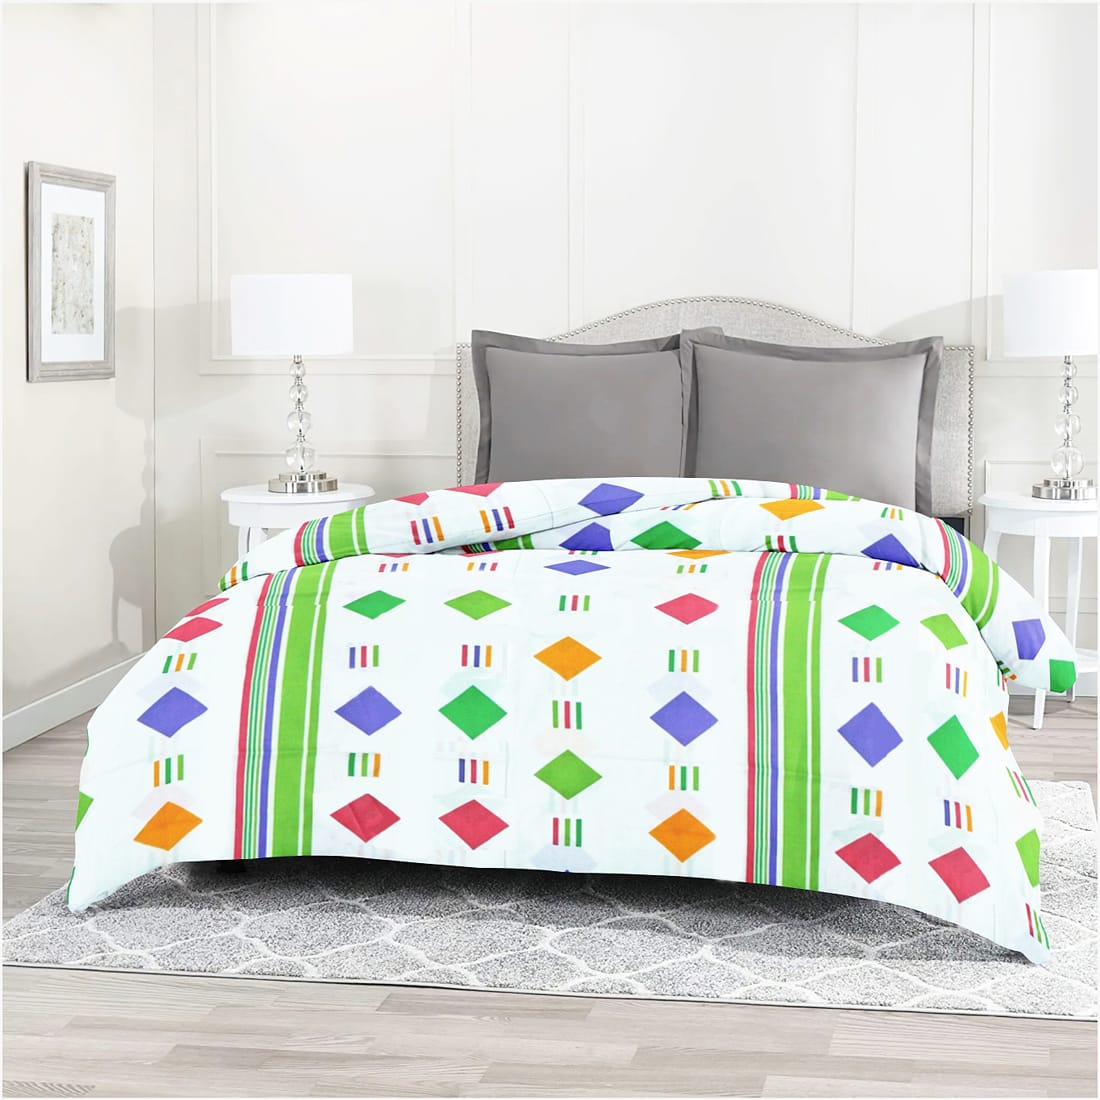 Printed Green Stripes Geometrical Squares Cotton Duvet Cover with Zipper